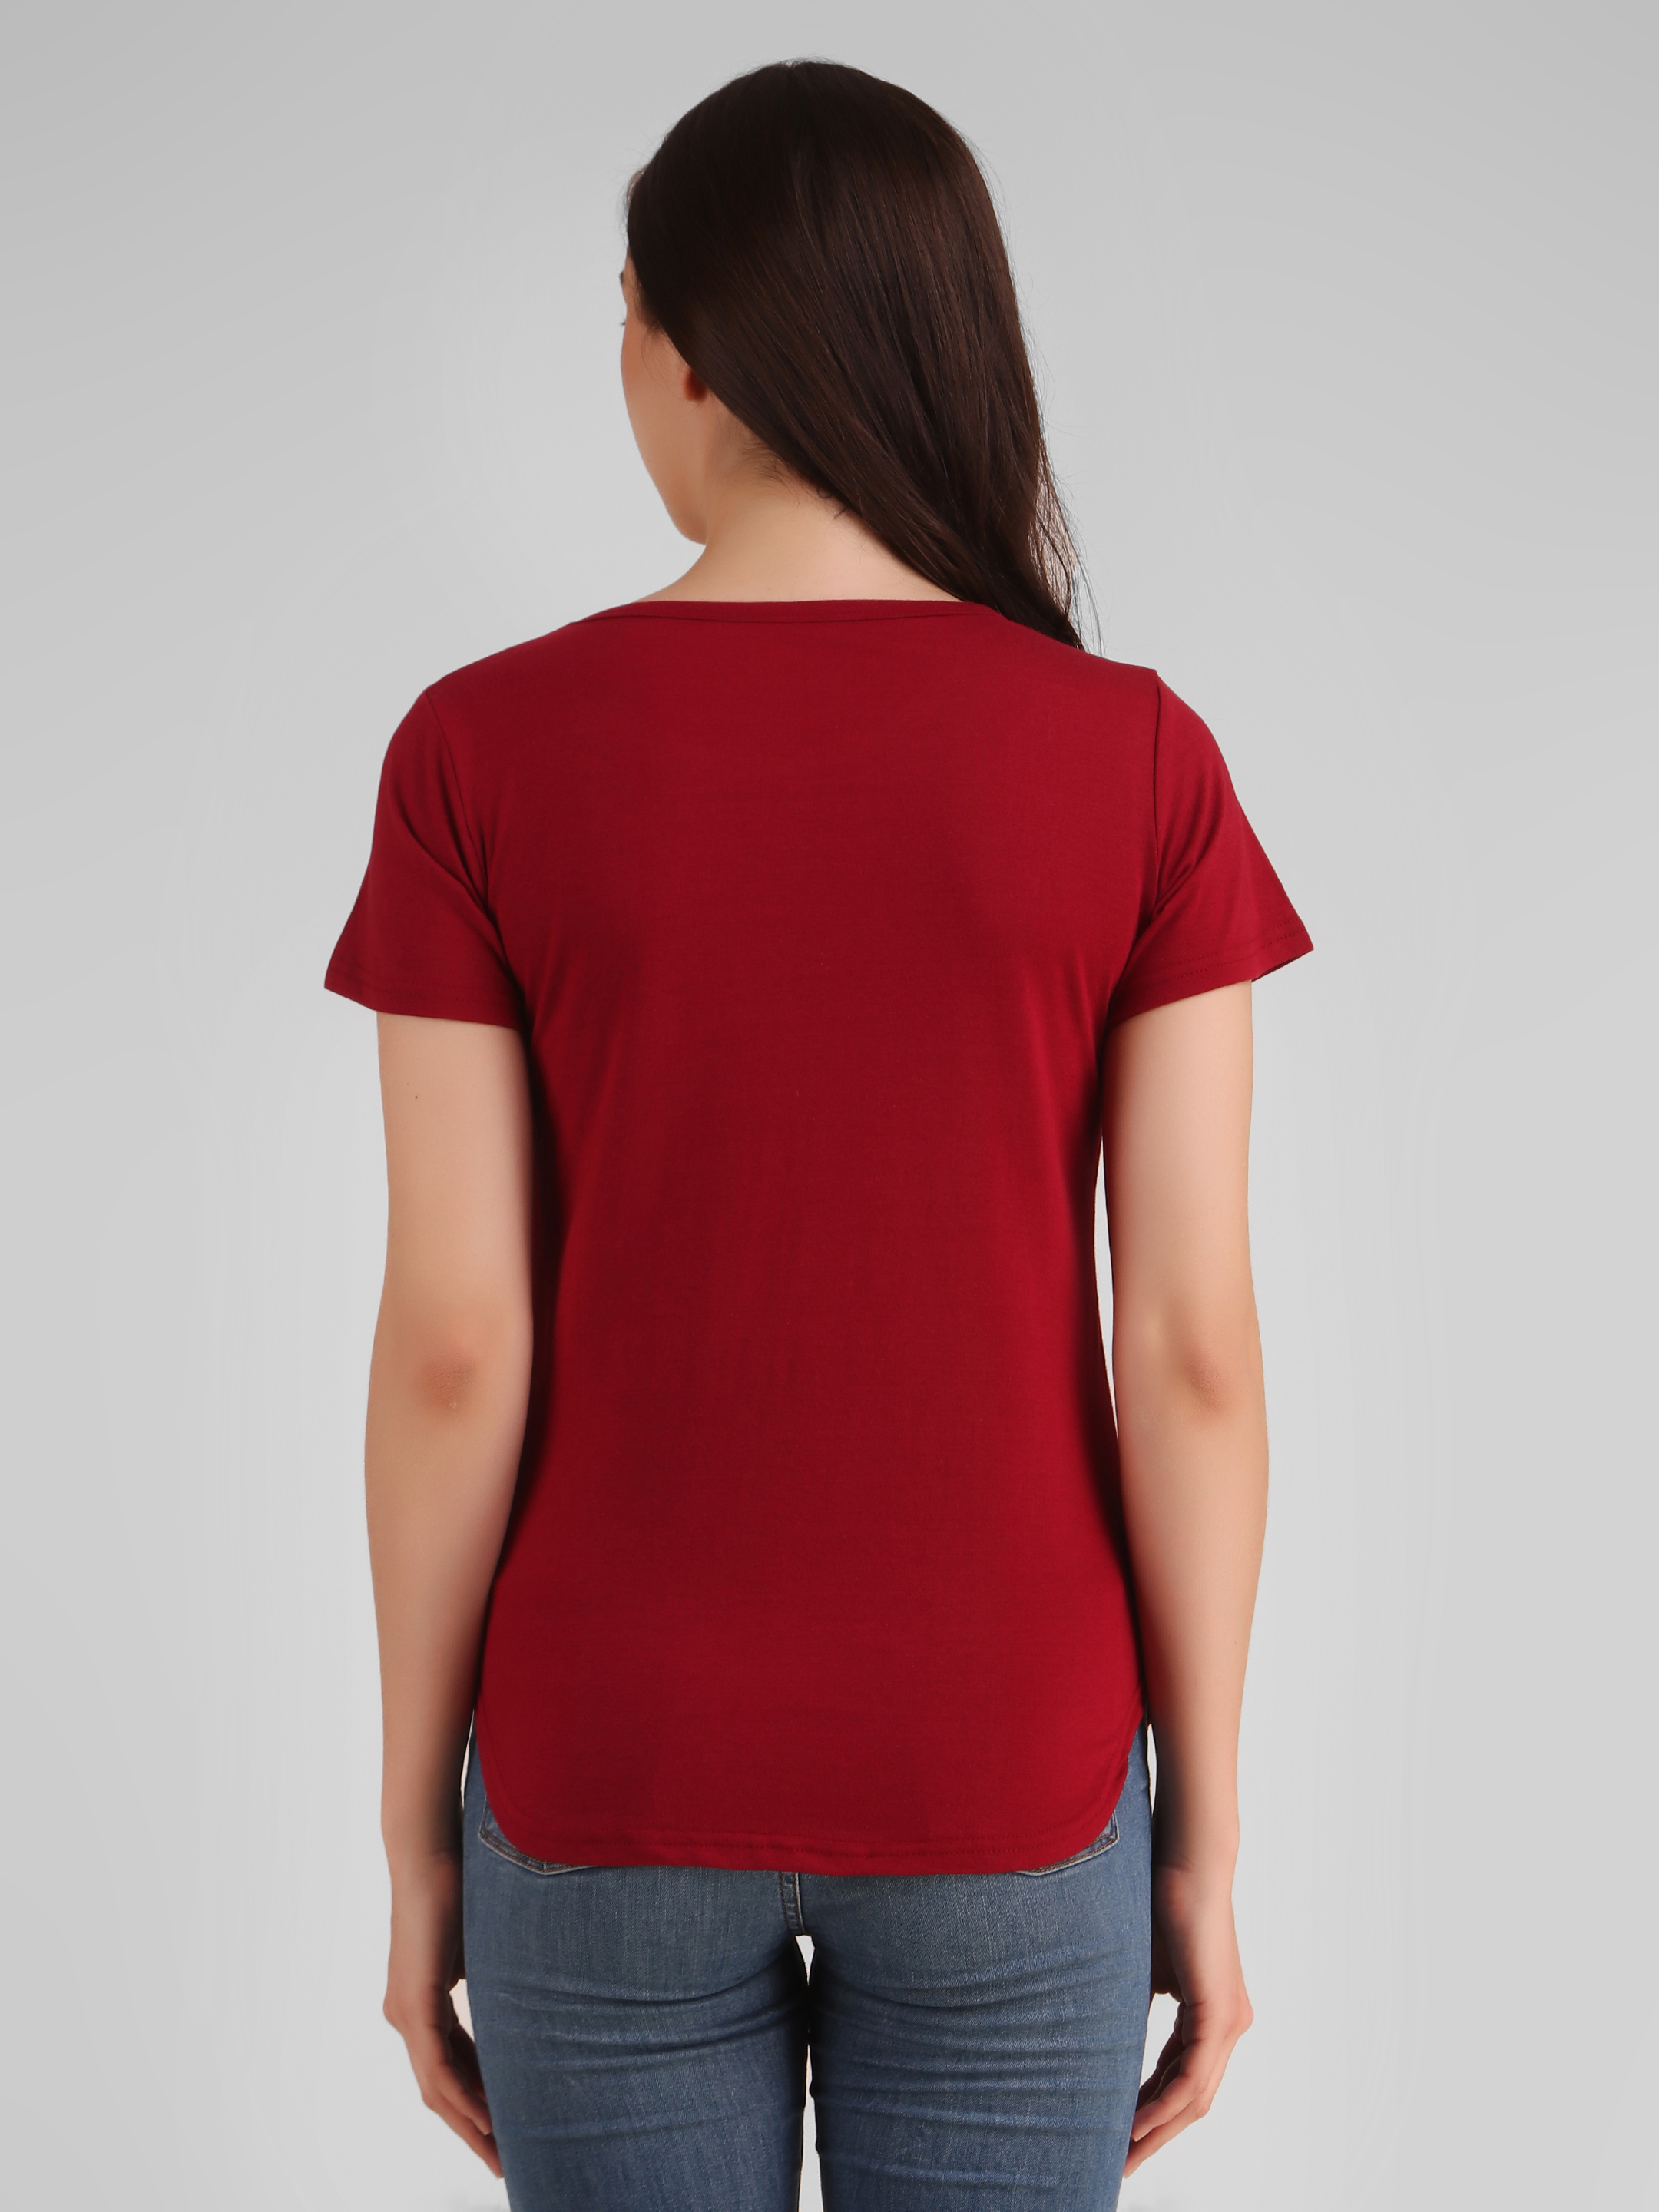 Buy Jollify Women's Stylish Printed Tee Combo Online @ ₹399 from ShopClues